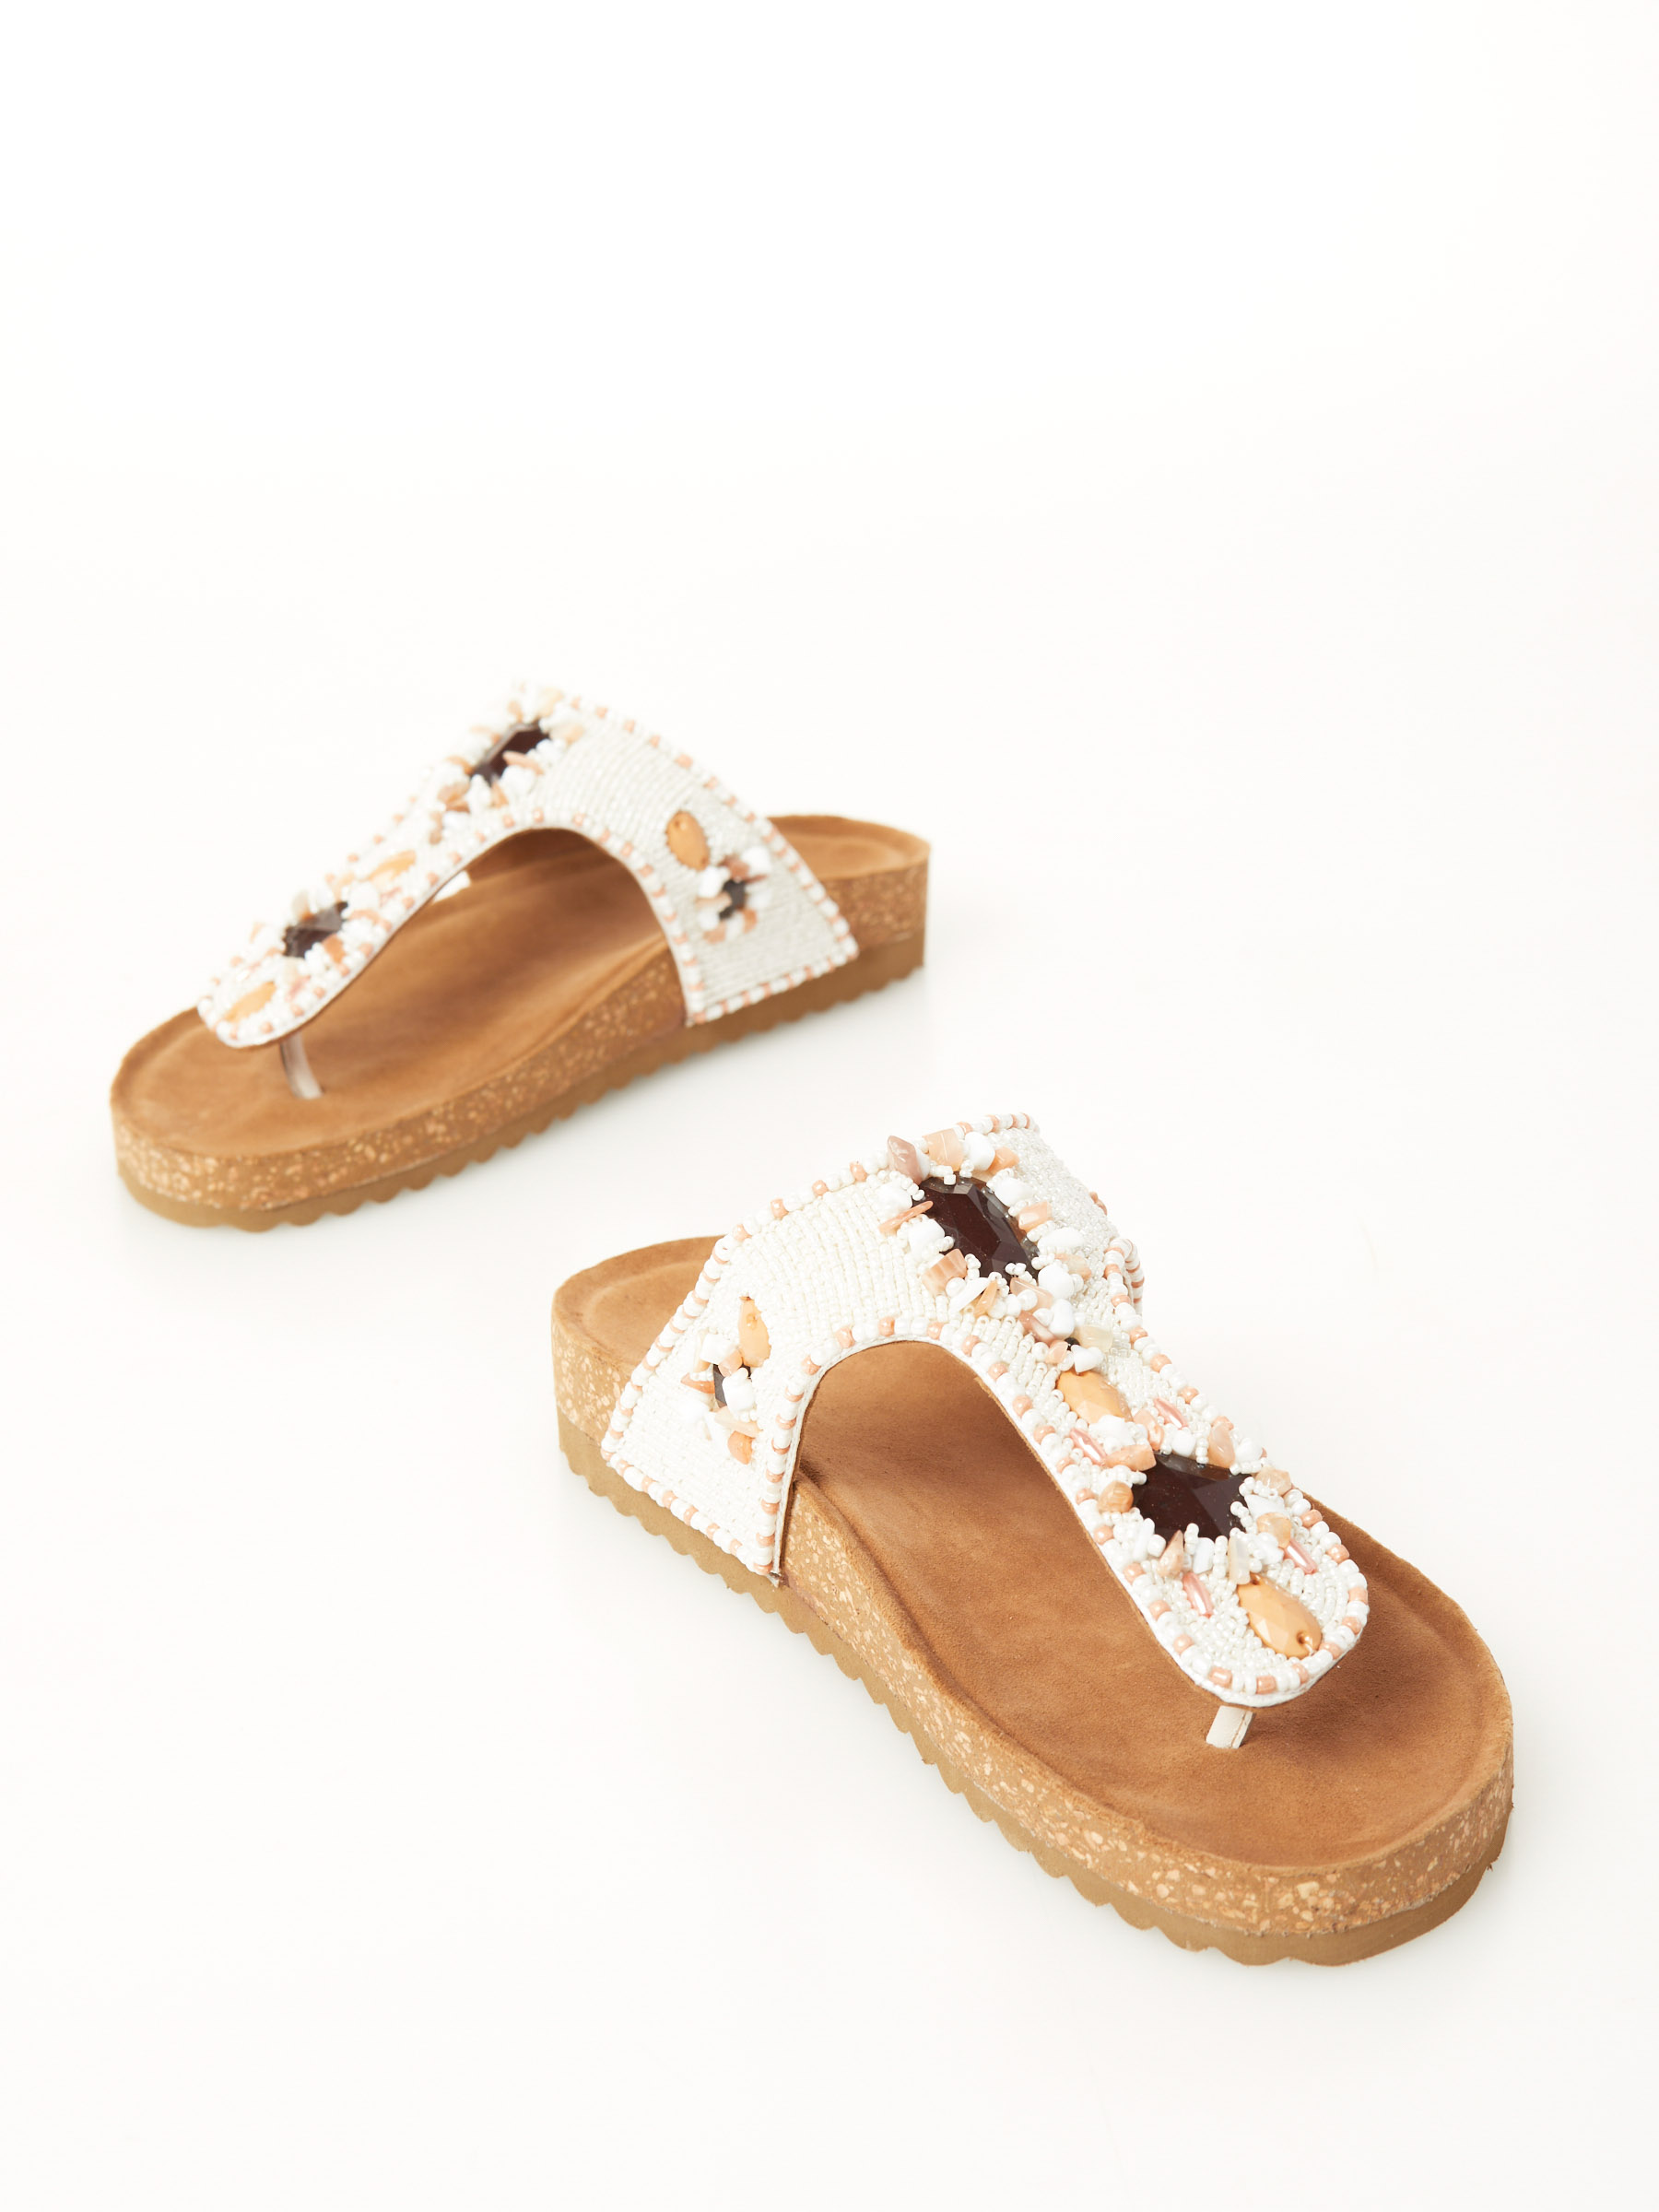 Codice Sconto Flip Flop In Leather With Beads F0545554-0537